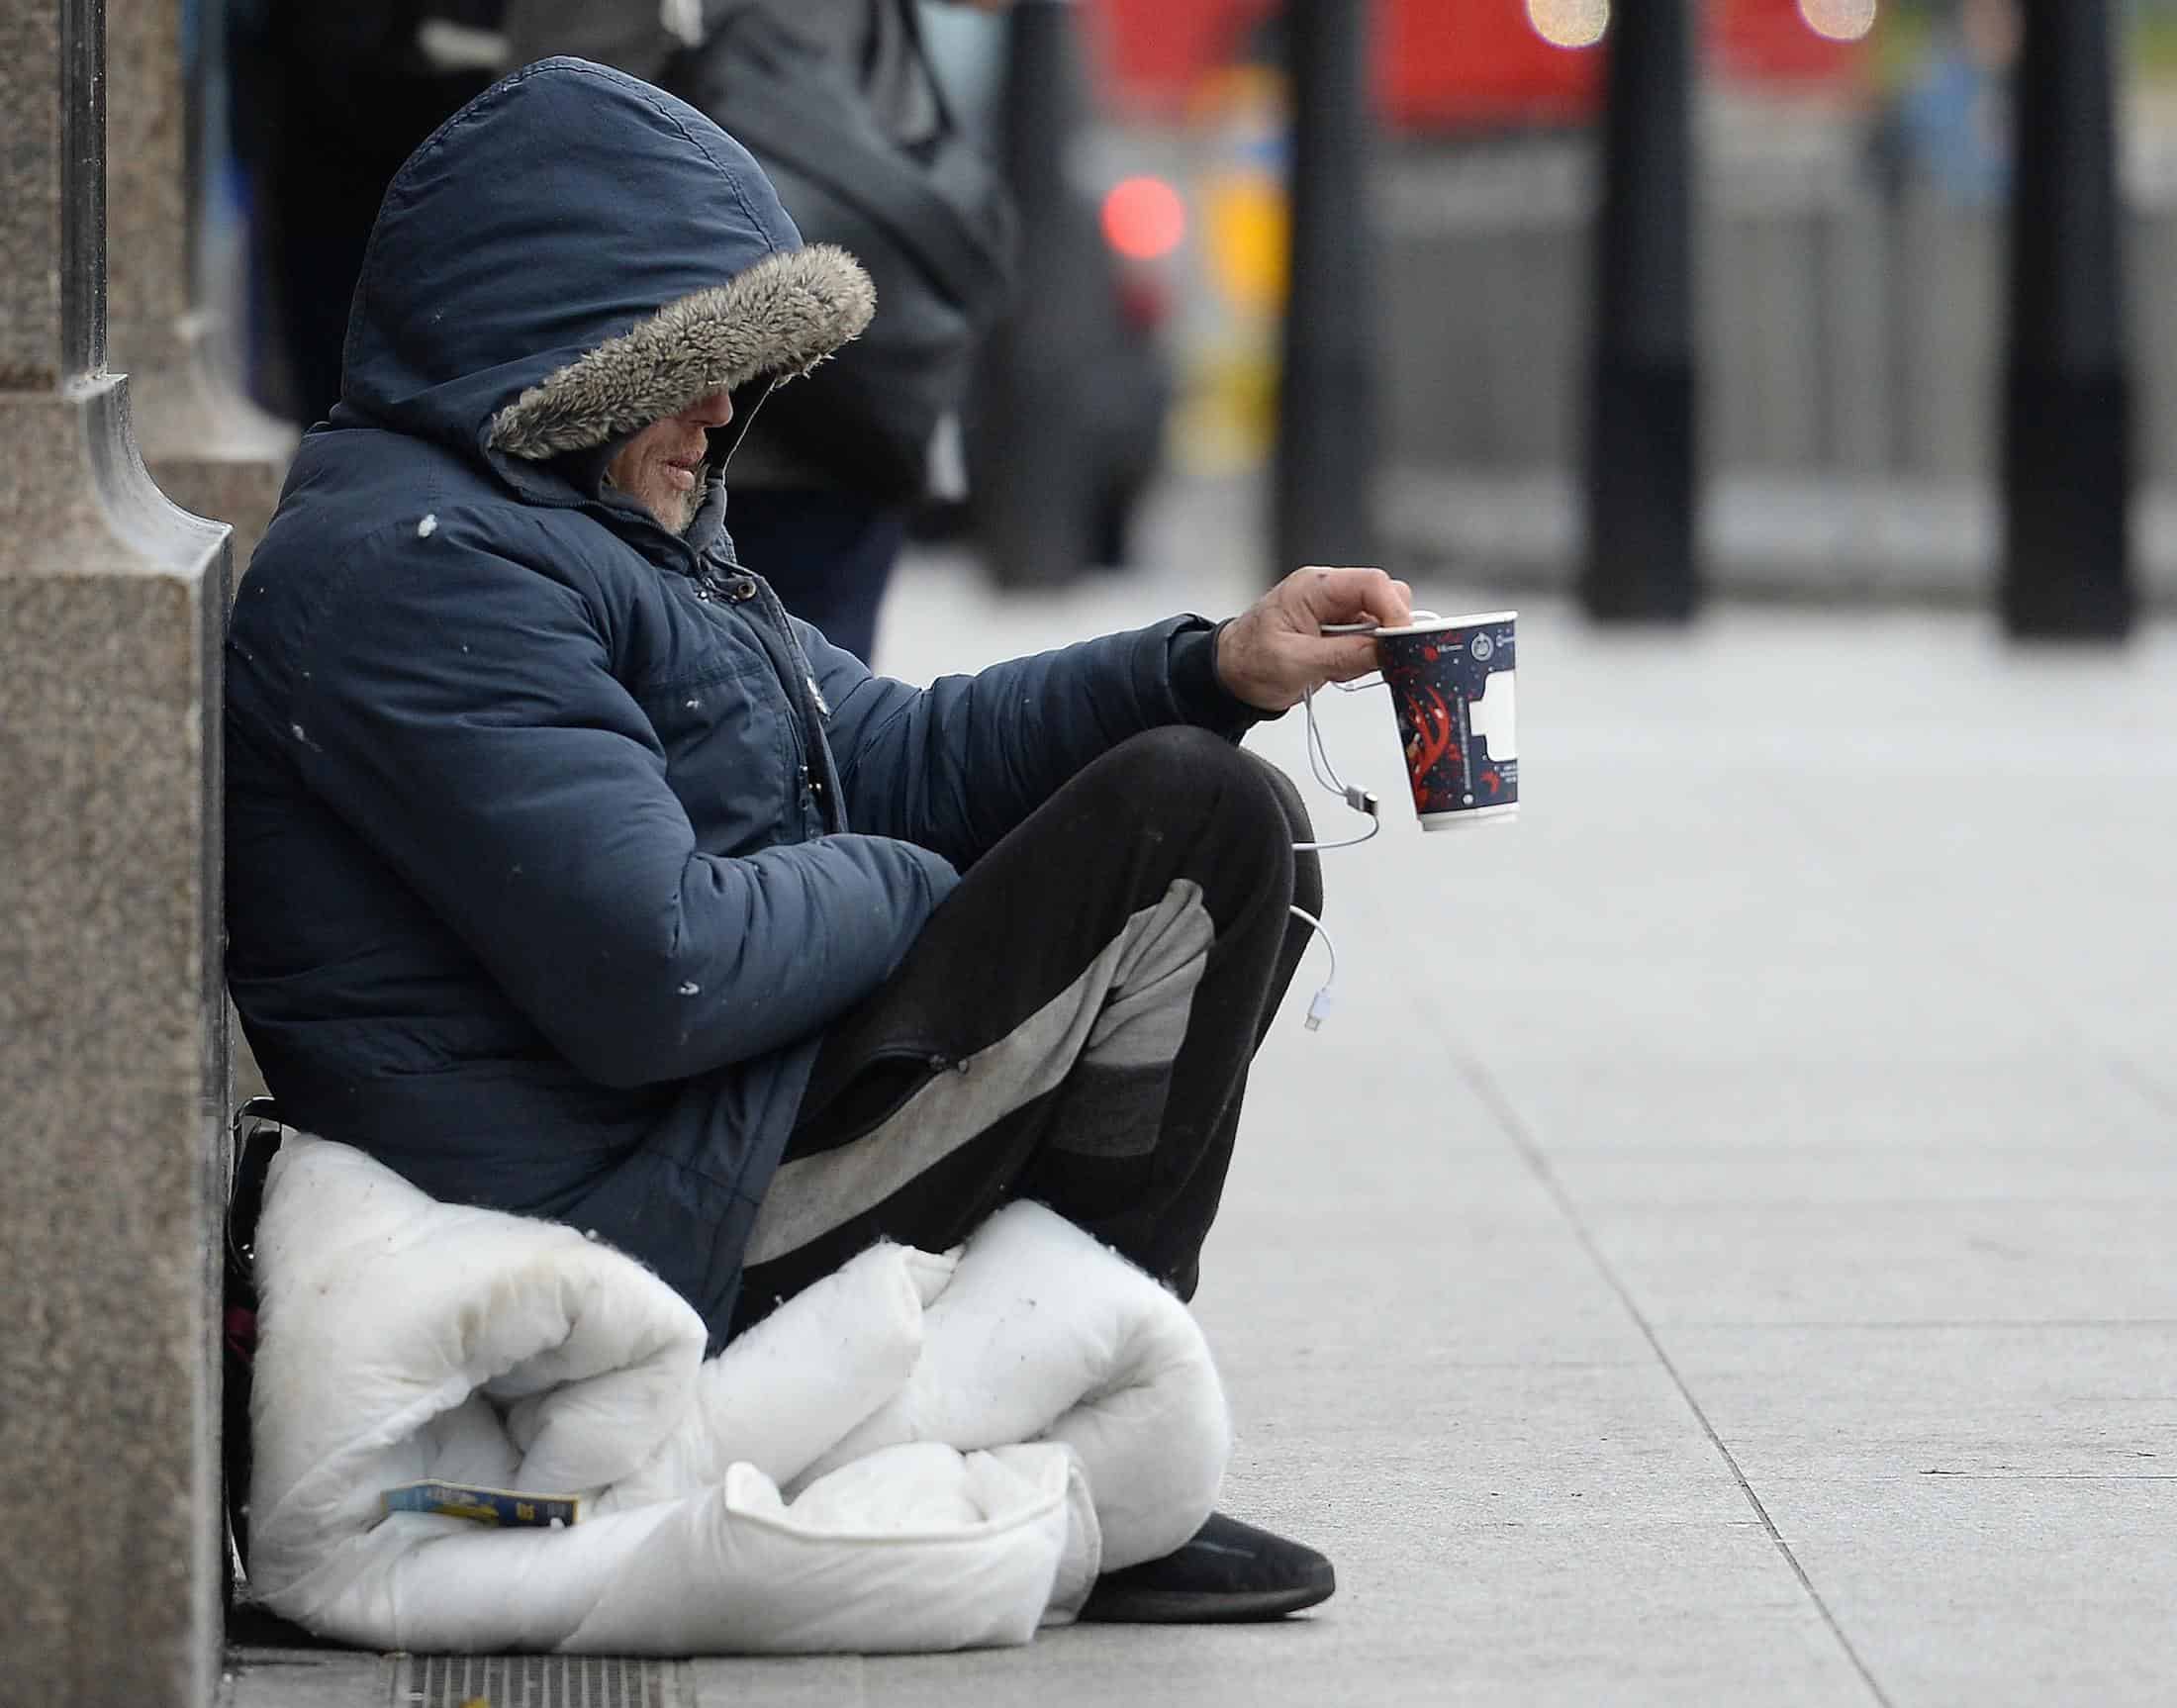 More than 1,300 homeless people died in UK in 2022, figures show